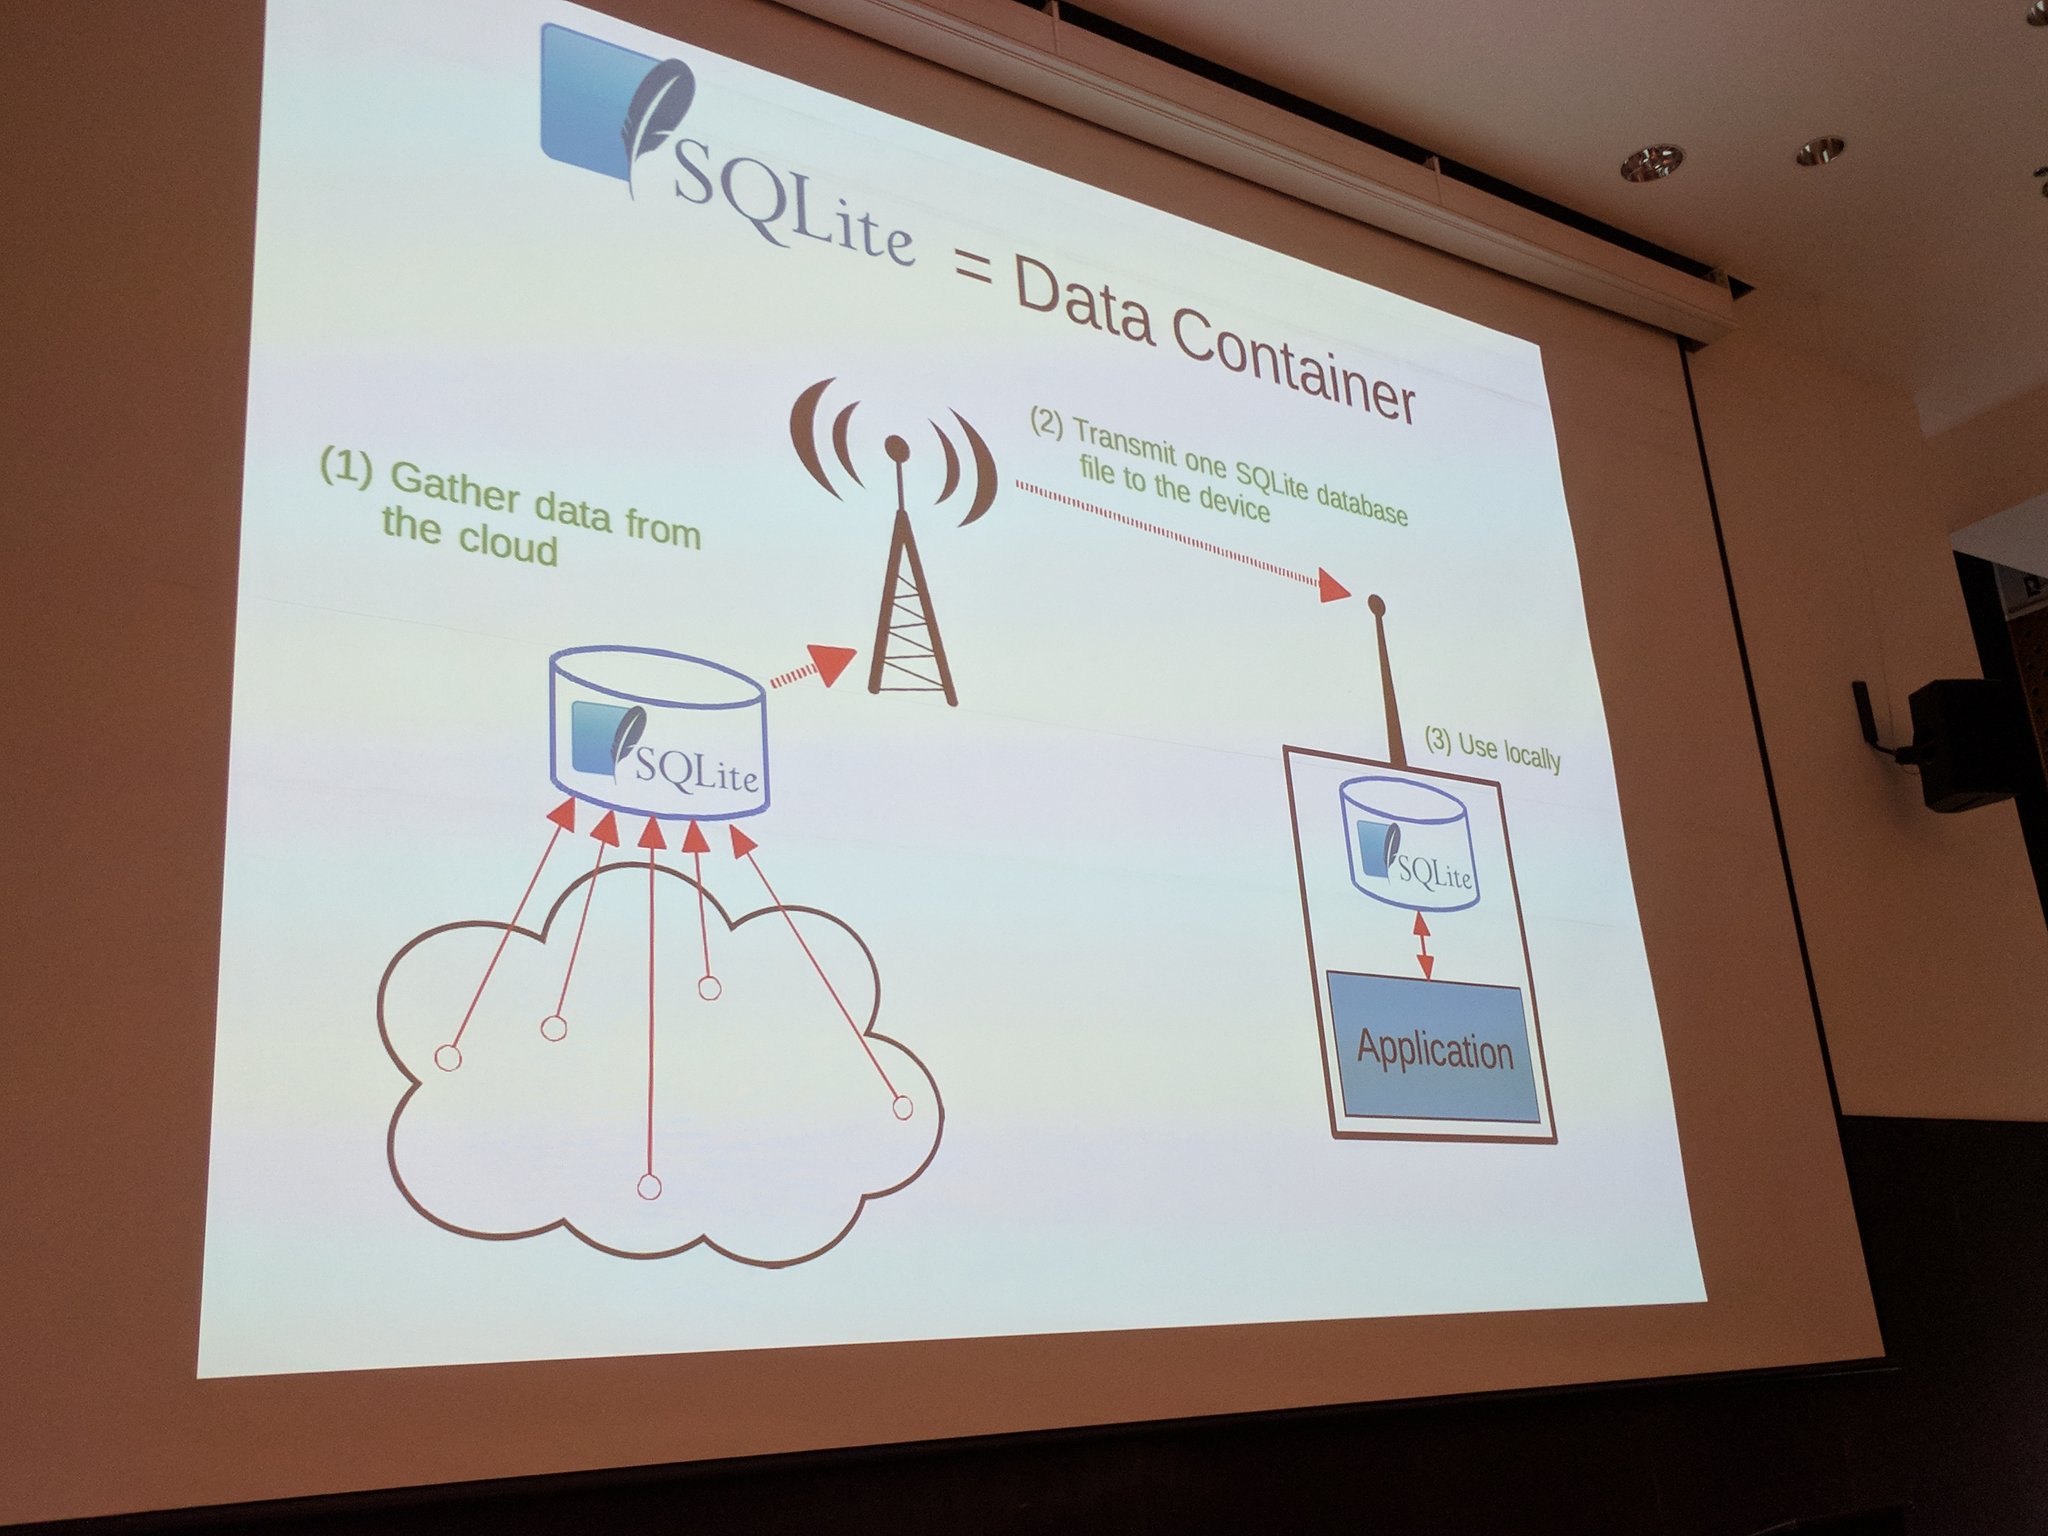 SQLite data container. 1. Gather data from the cloud. 2. Transmit SQLite database files to the device. 3. Use locally